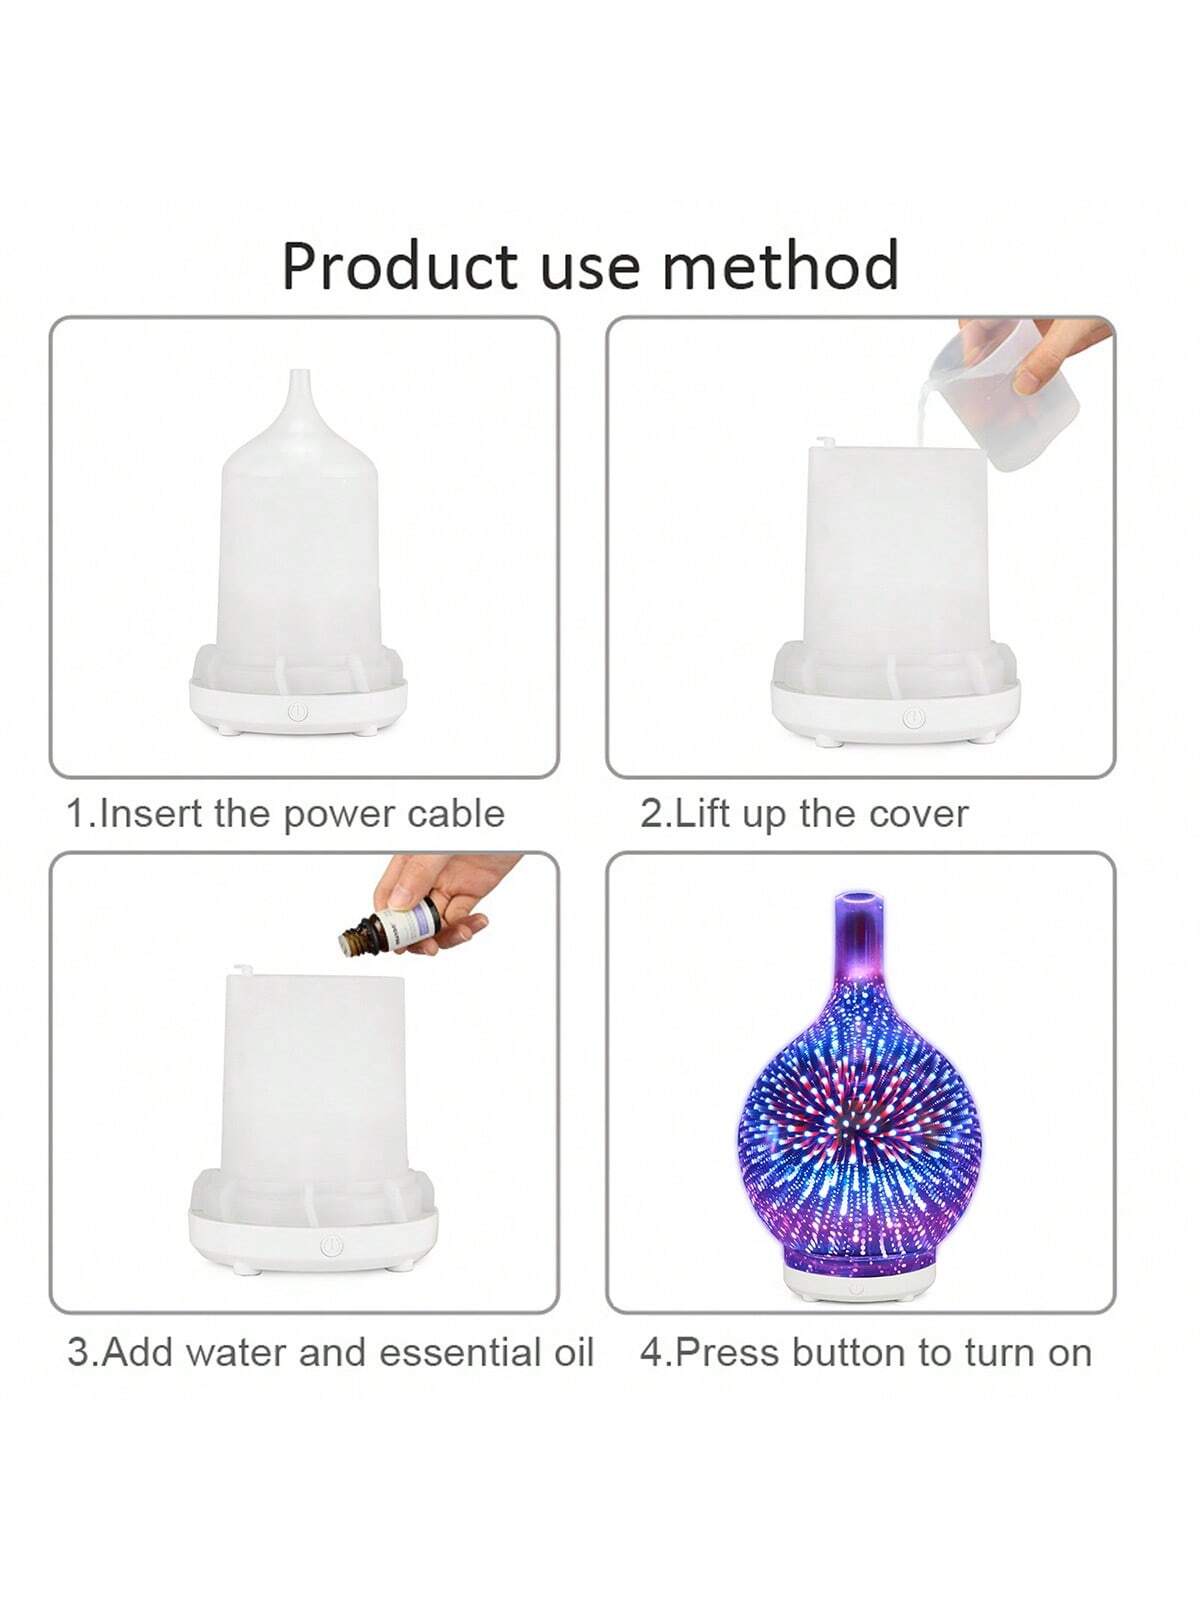 500ml Premium, Essential Oil Diffuser with Remote Control, 5 in 1 Ultrasonic Aromatherapy Fragrant Oil Humidifier Vaporizer, Timer and Auto-Off Safety Switch,Random black and white base.-glass color-2